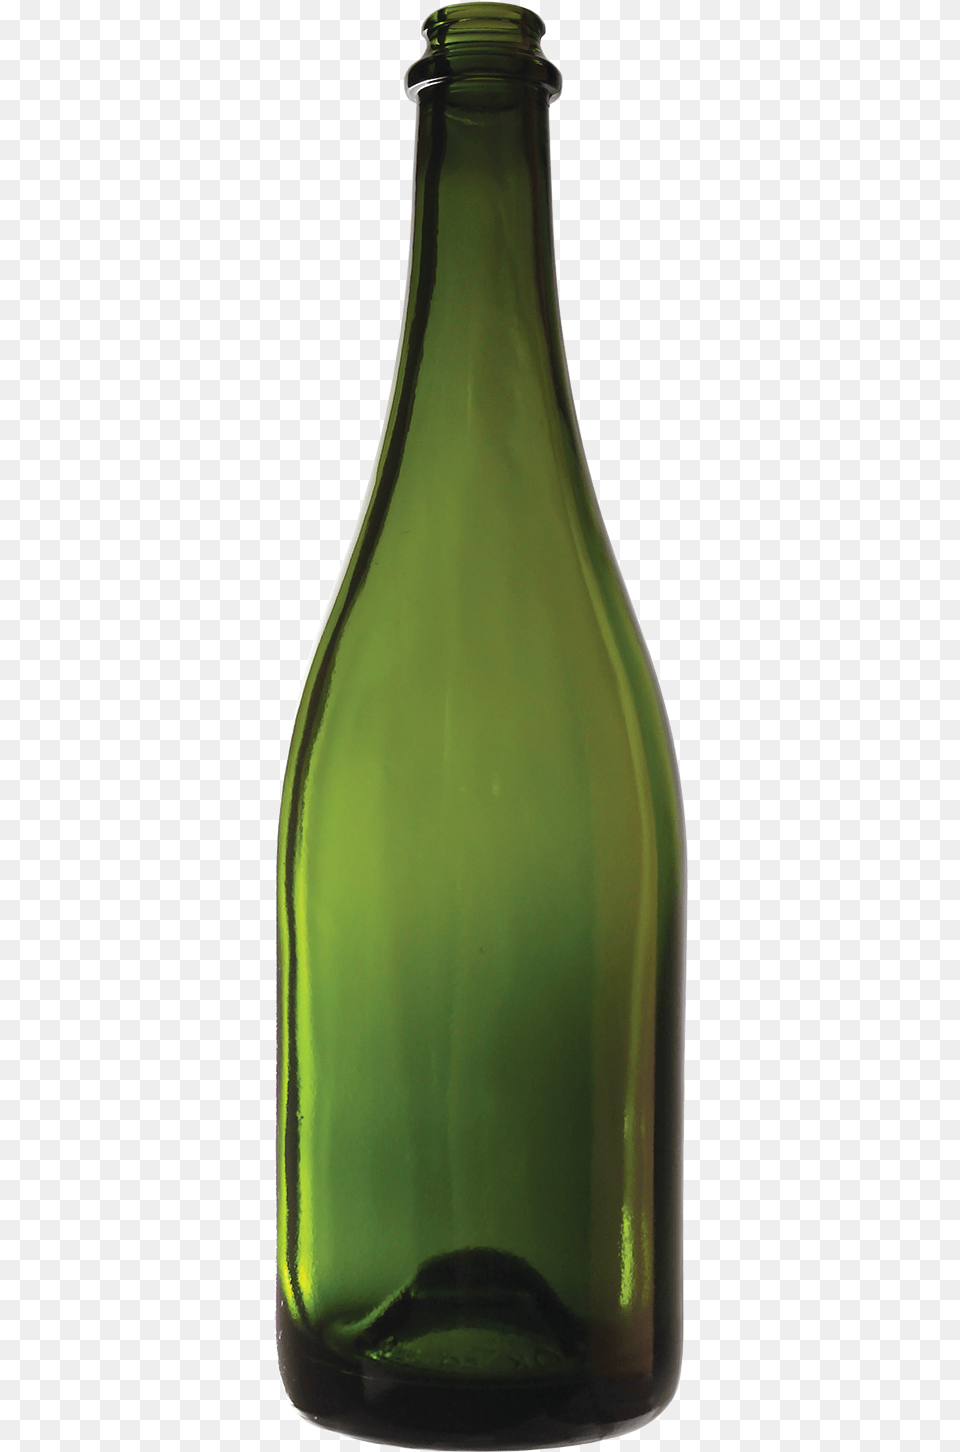 Wp 106 Champagne Bottle From Aac, Alcohol, Beverage, Liquor, Wine Png